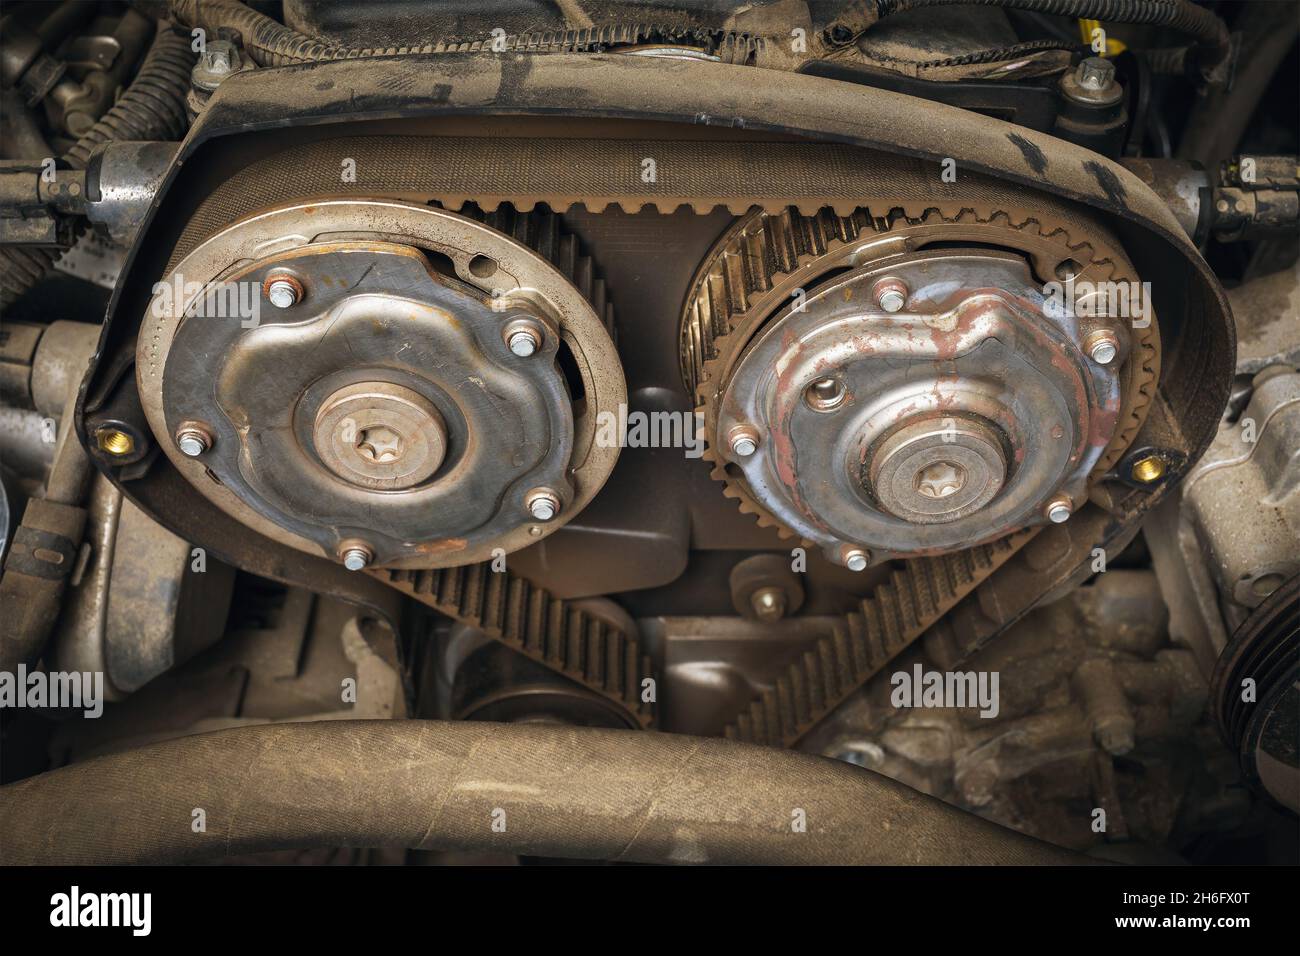 Open body with an old timing belt of a passenger car, close-up Stock Photo